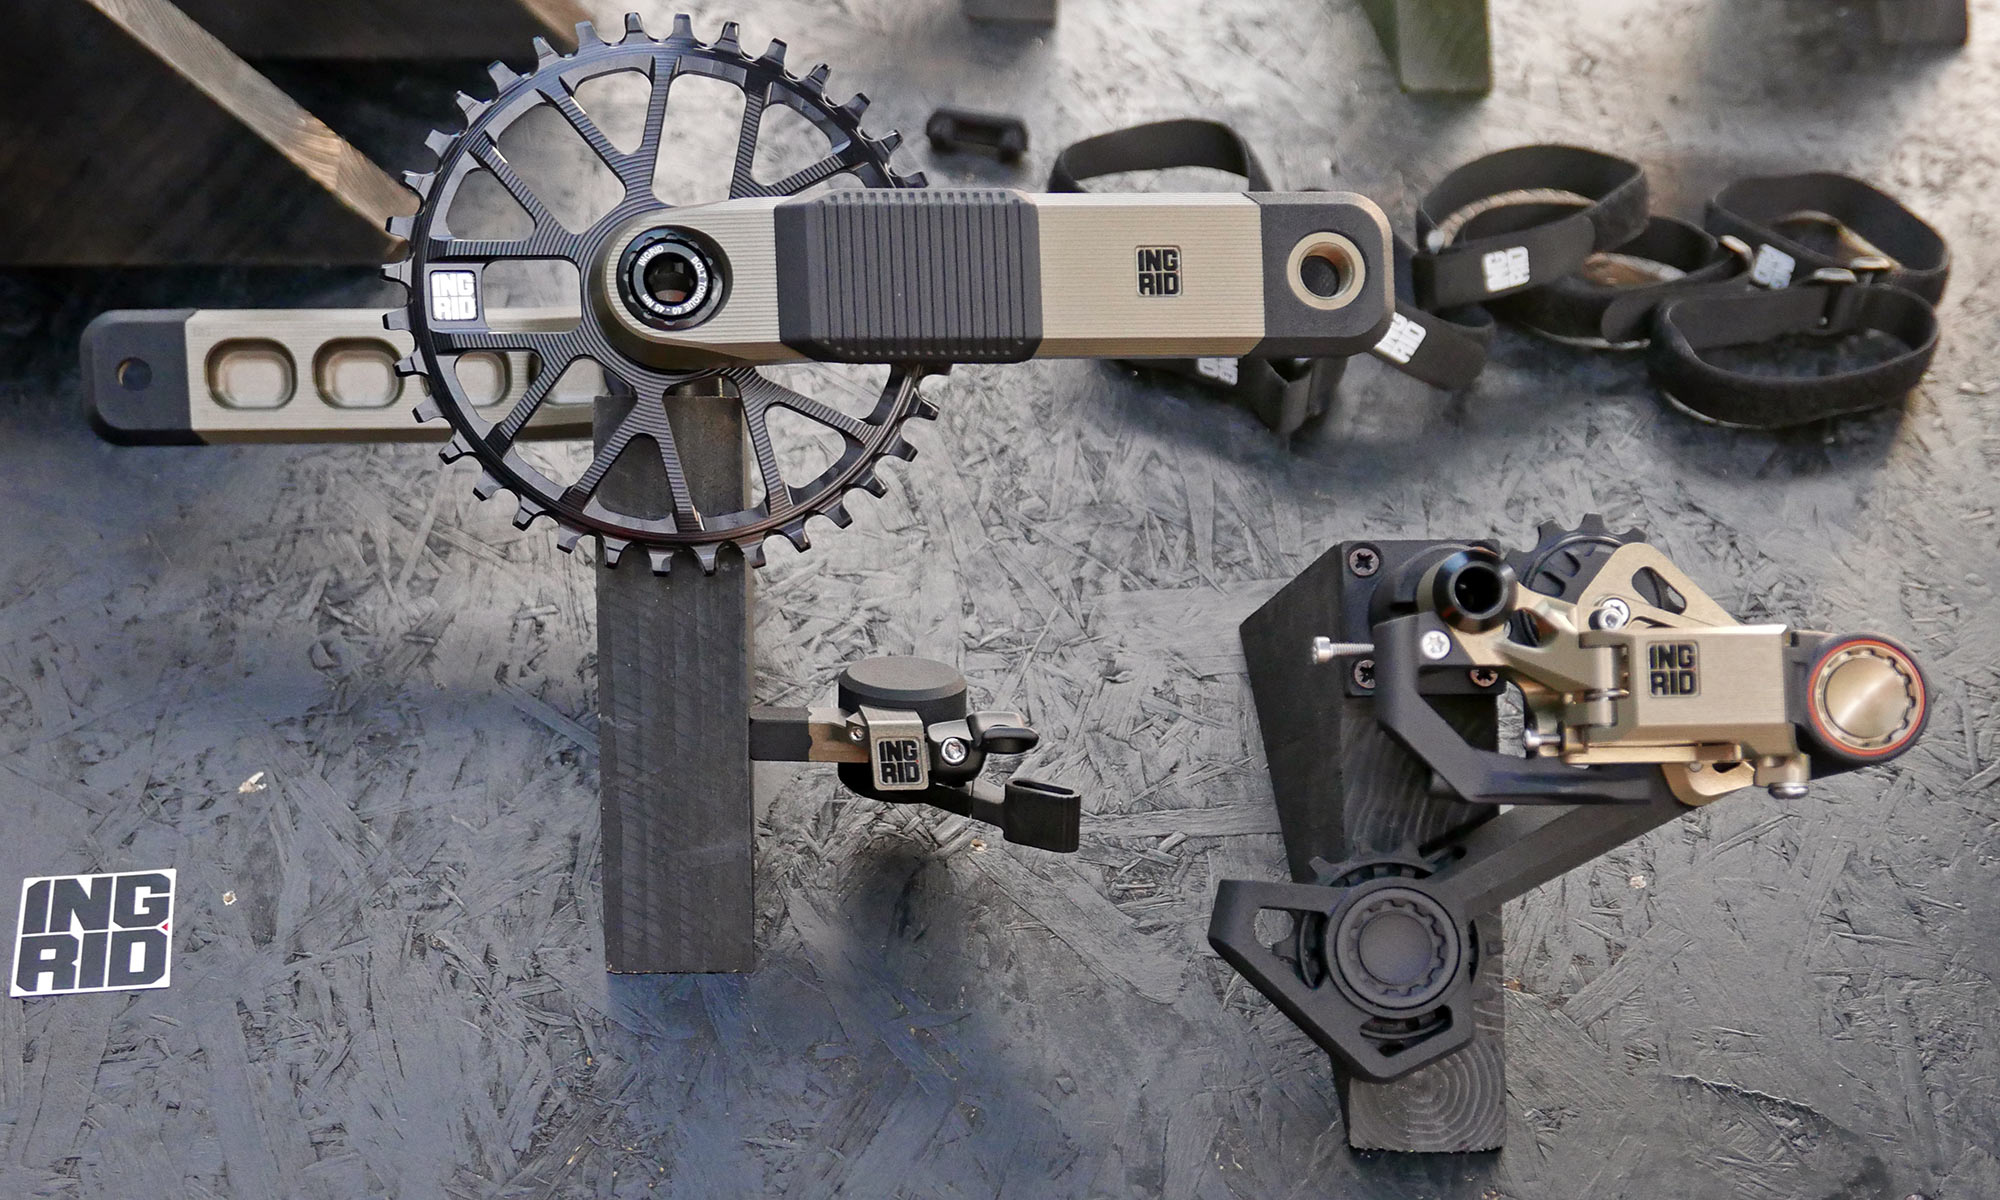 Ingrid MTB Trigger Shifter prototype and complete alternative 12-speed mechanical mountain bike groupset, made-in-Italy